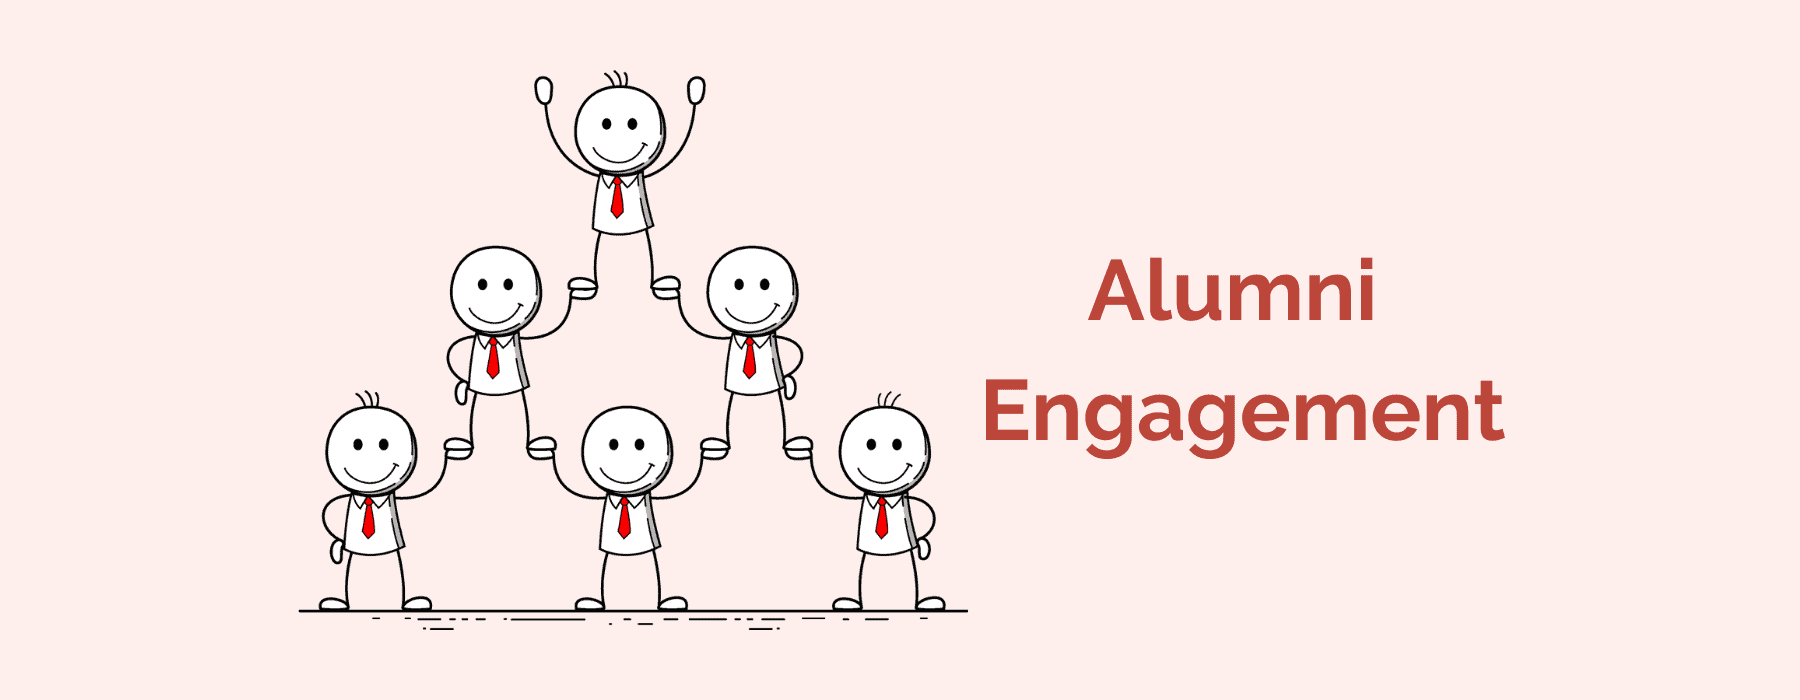 Are You Engaging These 4 Distinct Kinds of Alumni?